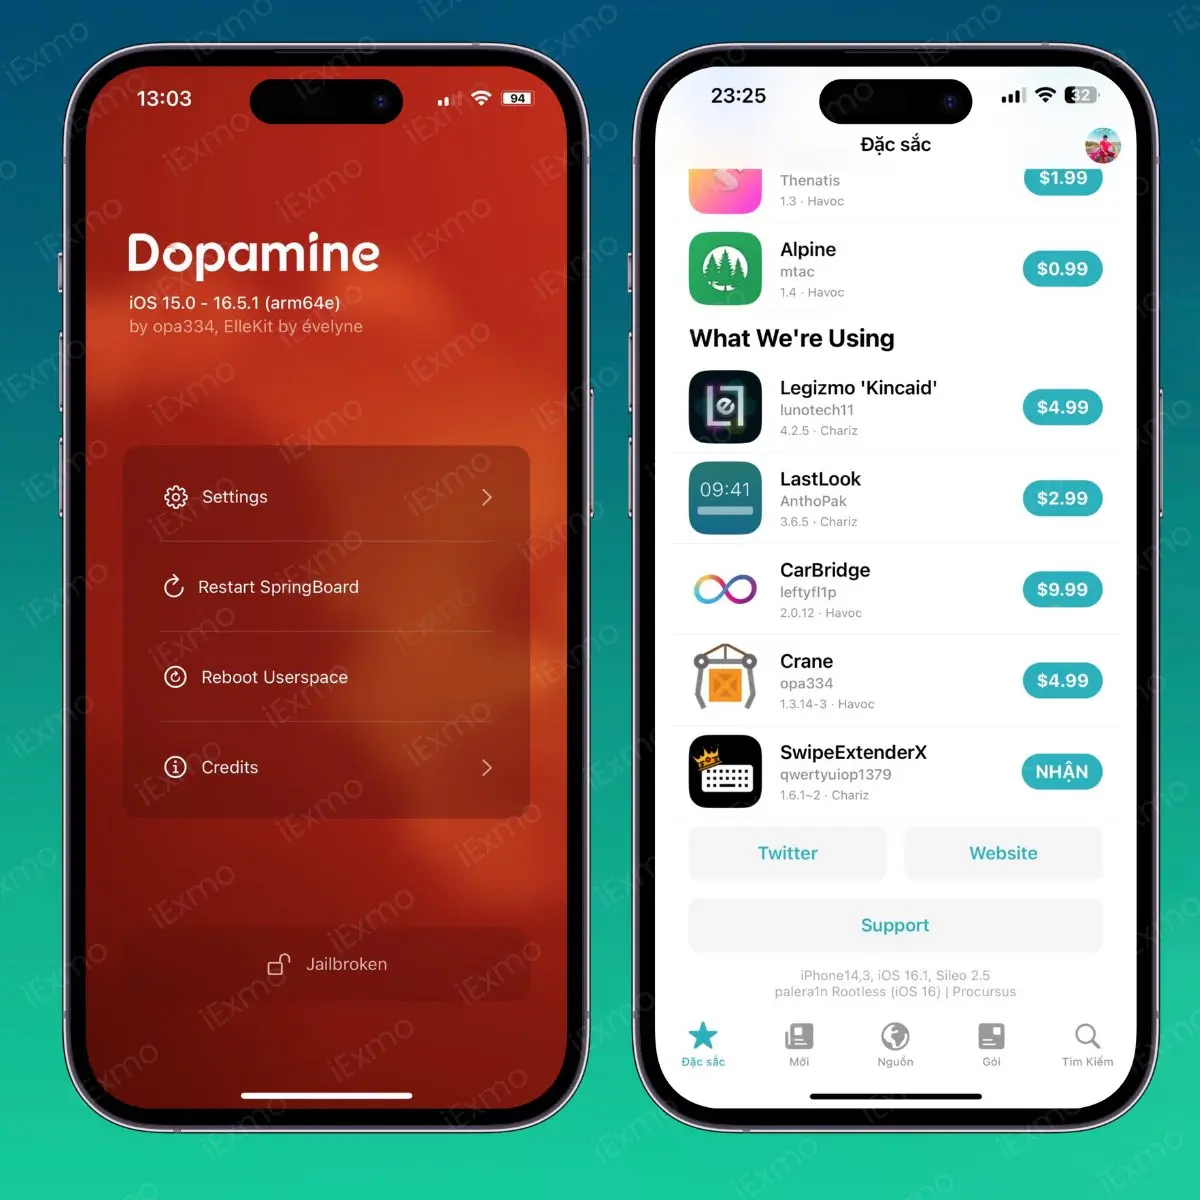 [iOS 15.0 to 16.6.1] Summary of jailbreak apps and repositories that are “installed from the beginning” with Dopamine 2 jailbreak!